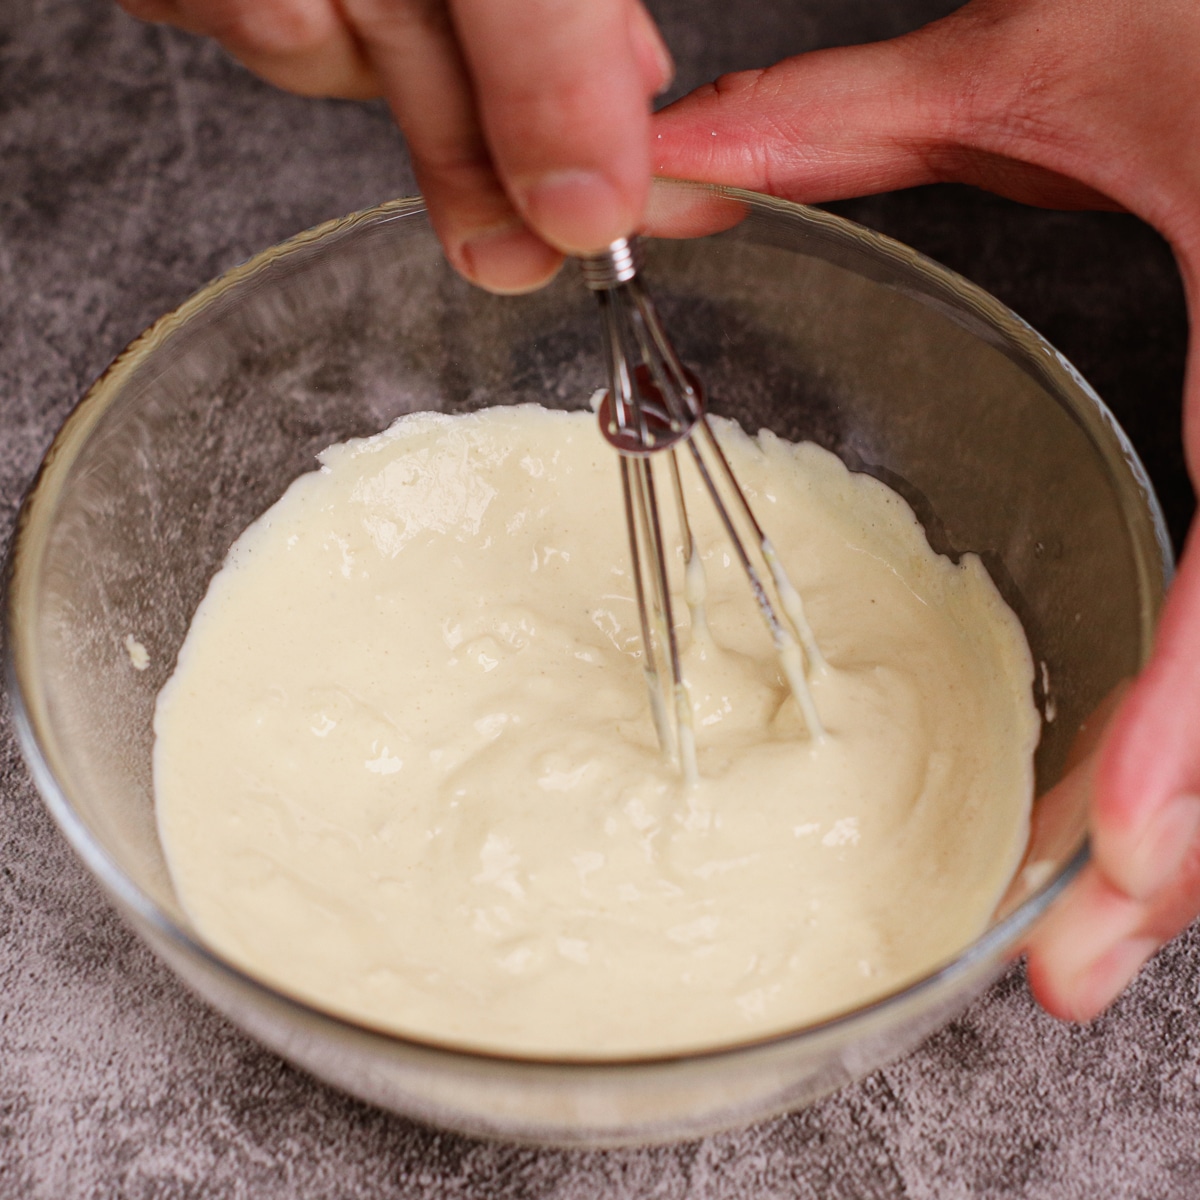 Mixing garlic mayo paste in a small bowl.